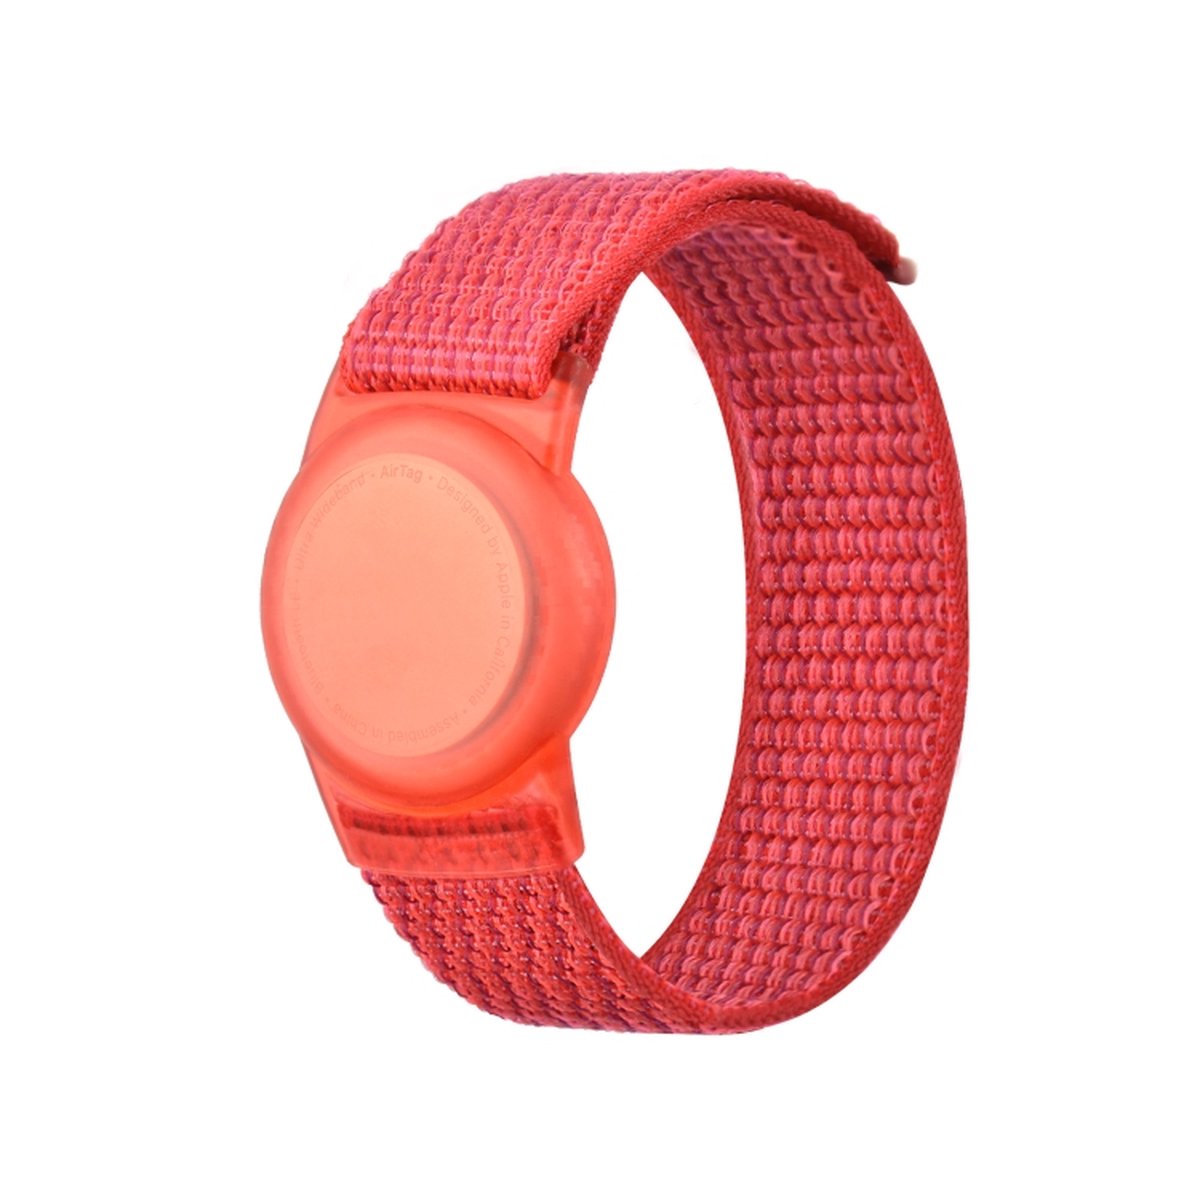 Airtag armband Polsband horloge - 17 CM - Airtag Sleutelhanger - Airtag Polsband Voor Kinderen - Airtag Armband - Airtag Apple - Klittenband - Airtag Houder - Airtag Hoesje - rood